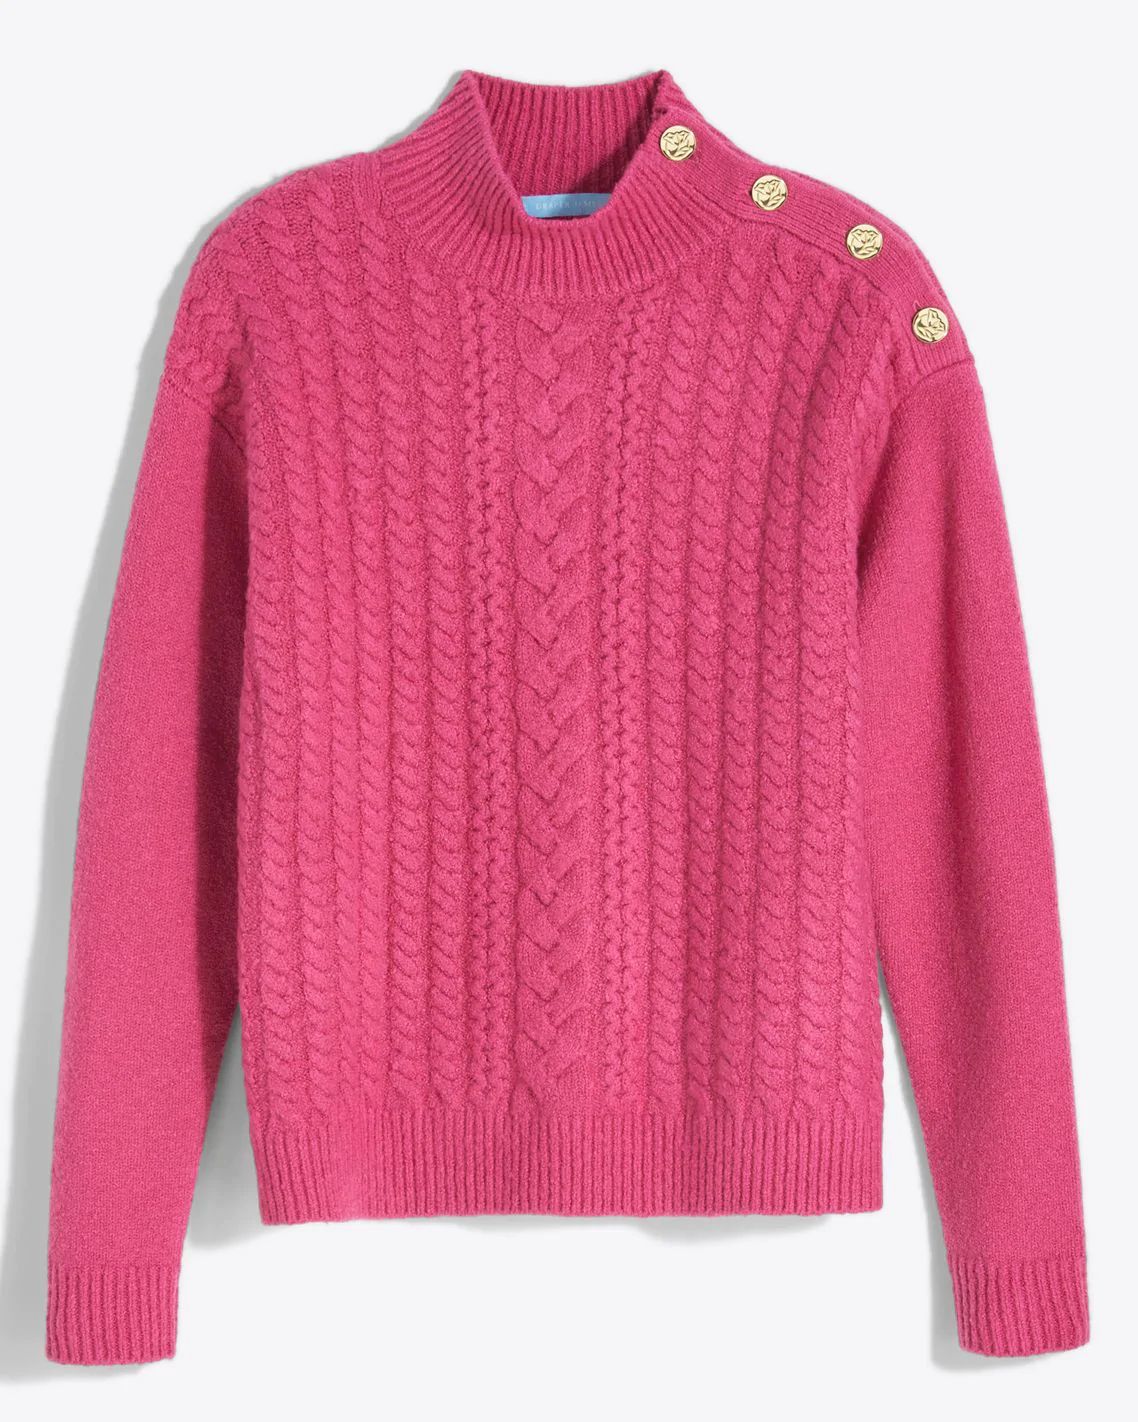 Cable Knit Turtleneck Sweater in Raspberry Pink | Draper James (US)